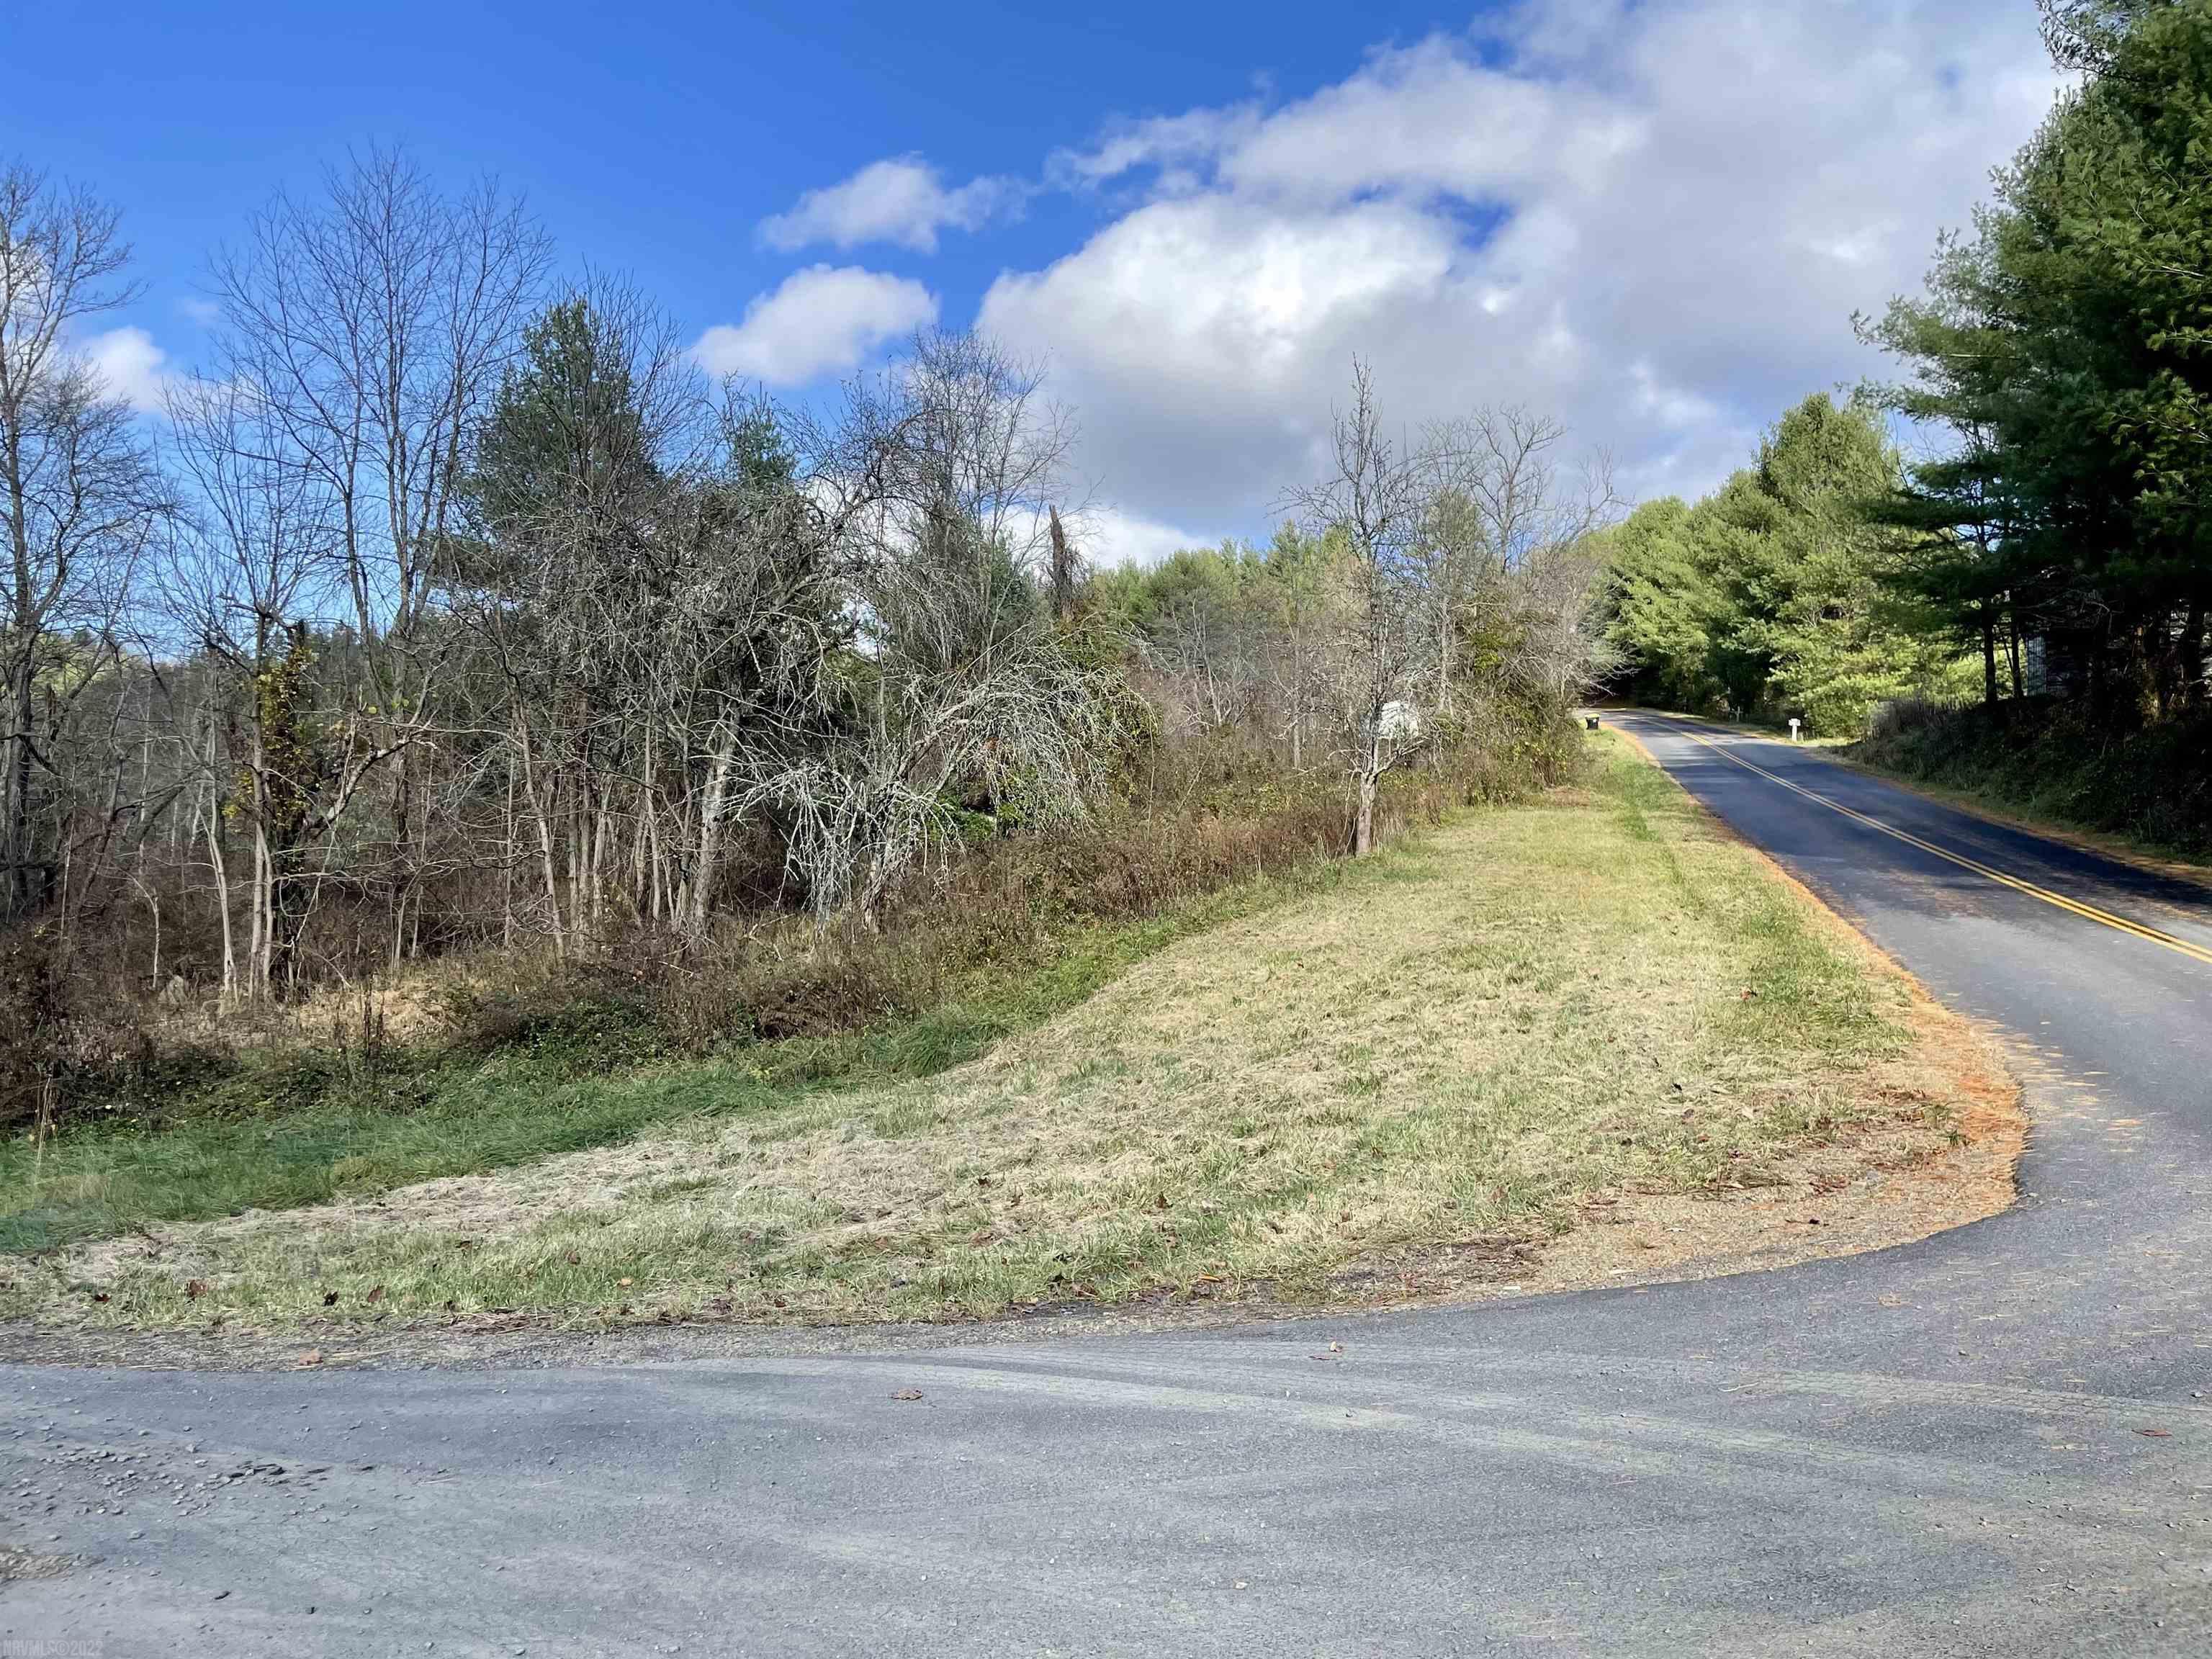 Looking for a site to build your forever home?  This lot, almost 3/4 of an acre, is located outside of Hillsville in Carroll County.  Conveniently located only 12 minutes from I-77 Poplar Camp exit 24 or 20 minutes from I-81 Pulaski/Hillsville exit 89.  The town of Hillsville---lots of dining, outdoor activities, schools, shopping, medical facilities, etc--is located a short 6 miles away.  This property borders Sugar Creek---you'll love hearing the  sound of the bold creek!  Public water is available for hook-up.